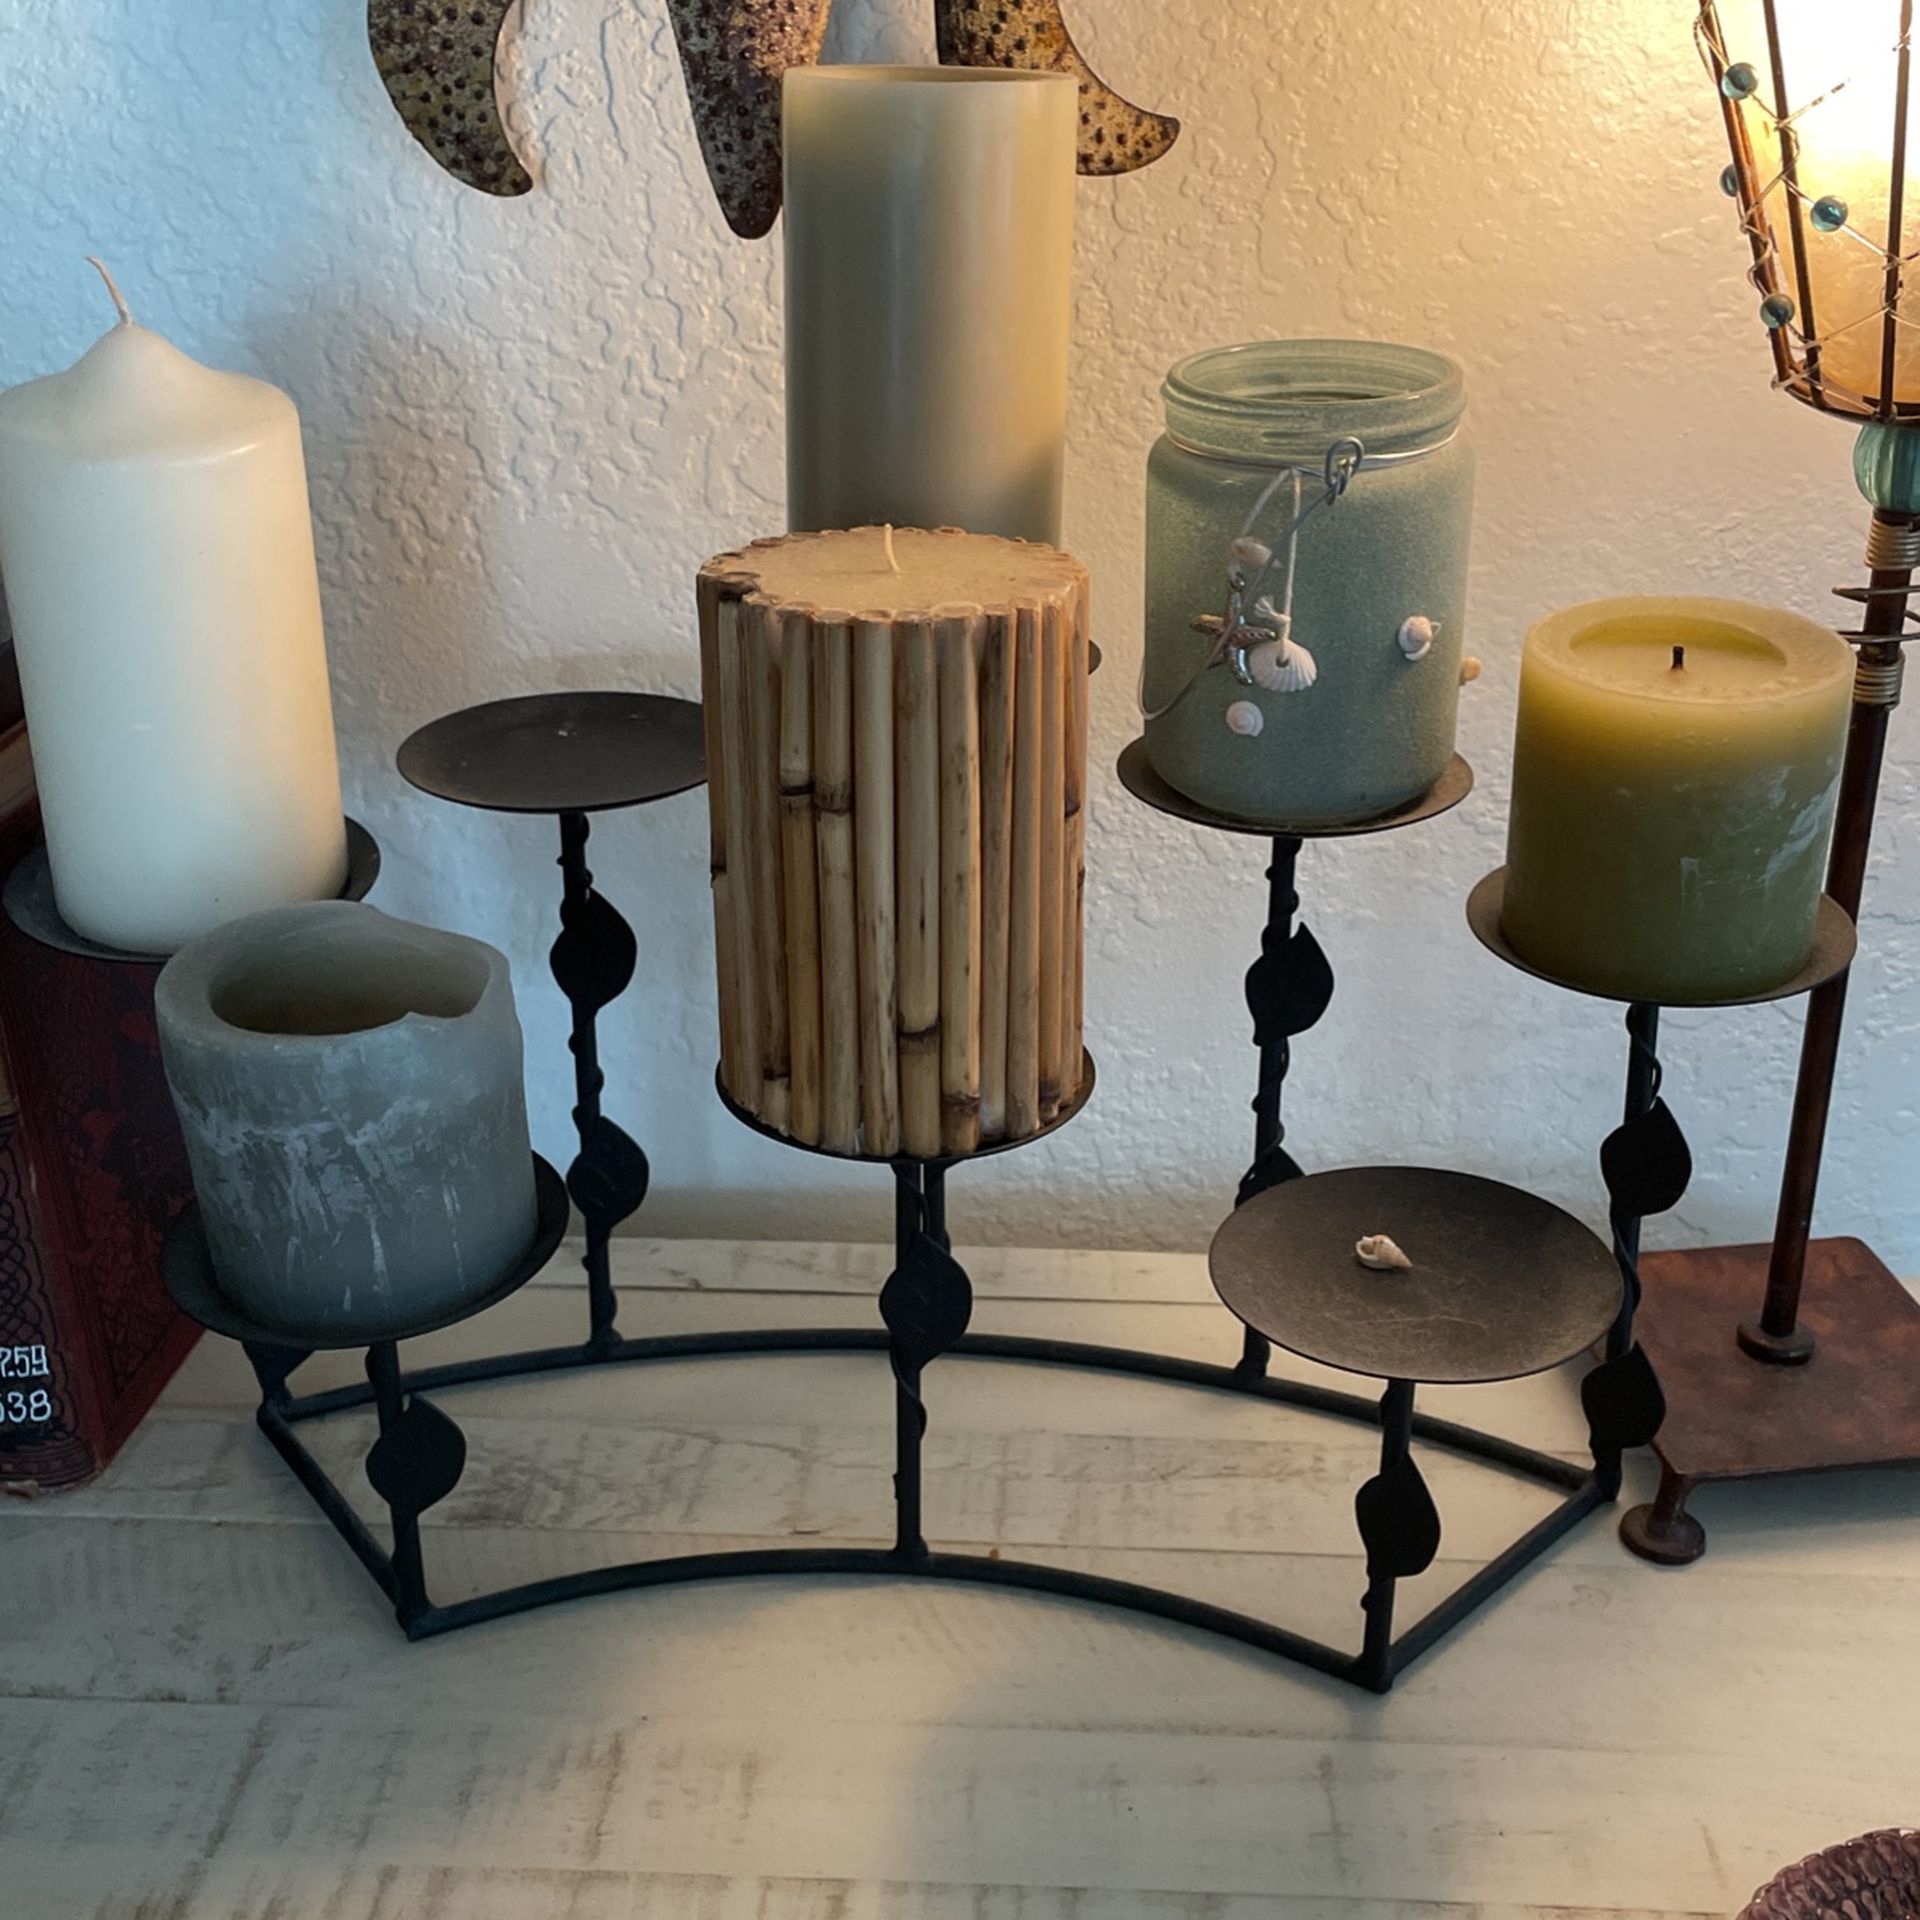 Sturdy metal Candle Holder - $10.99